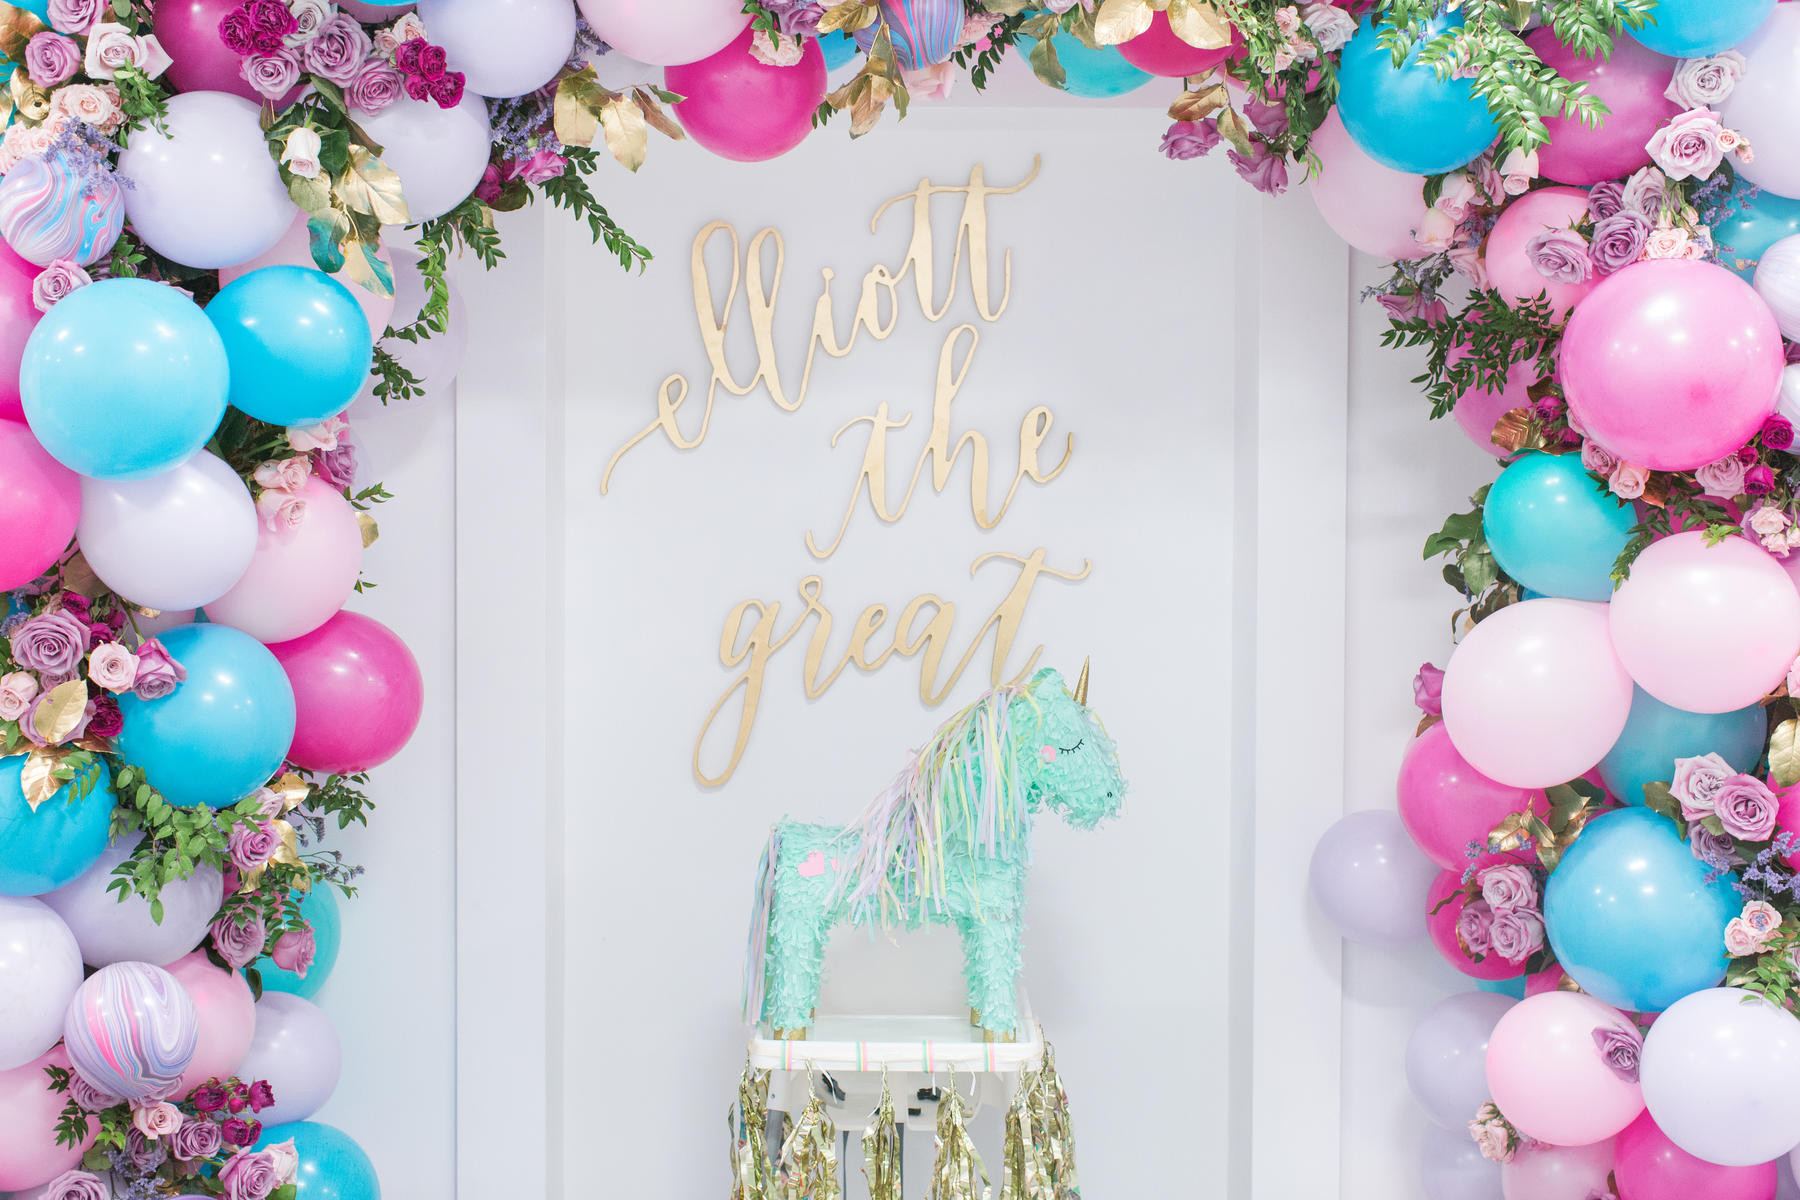 Unicorn Bday Party Ideas
 This Unicorn Themed 1st Birthday Party Is Definitely the